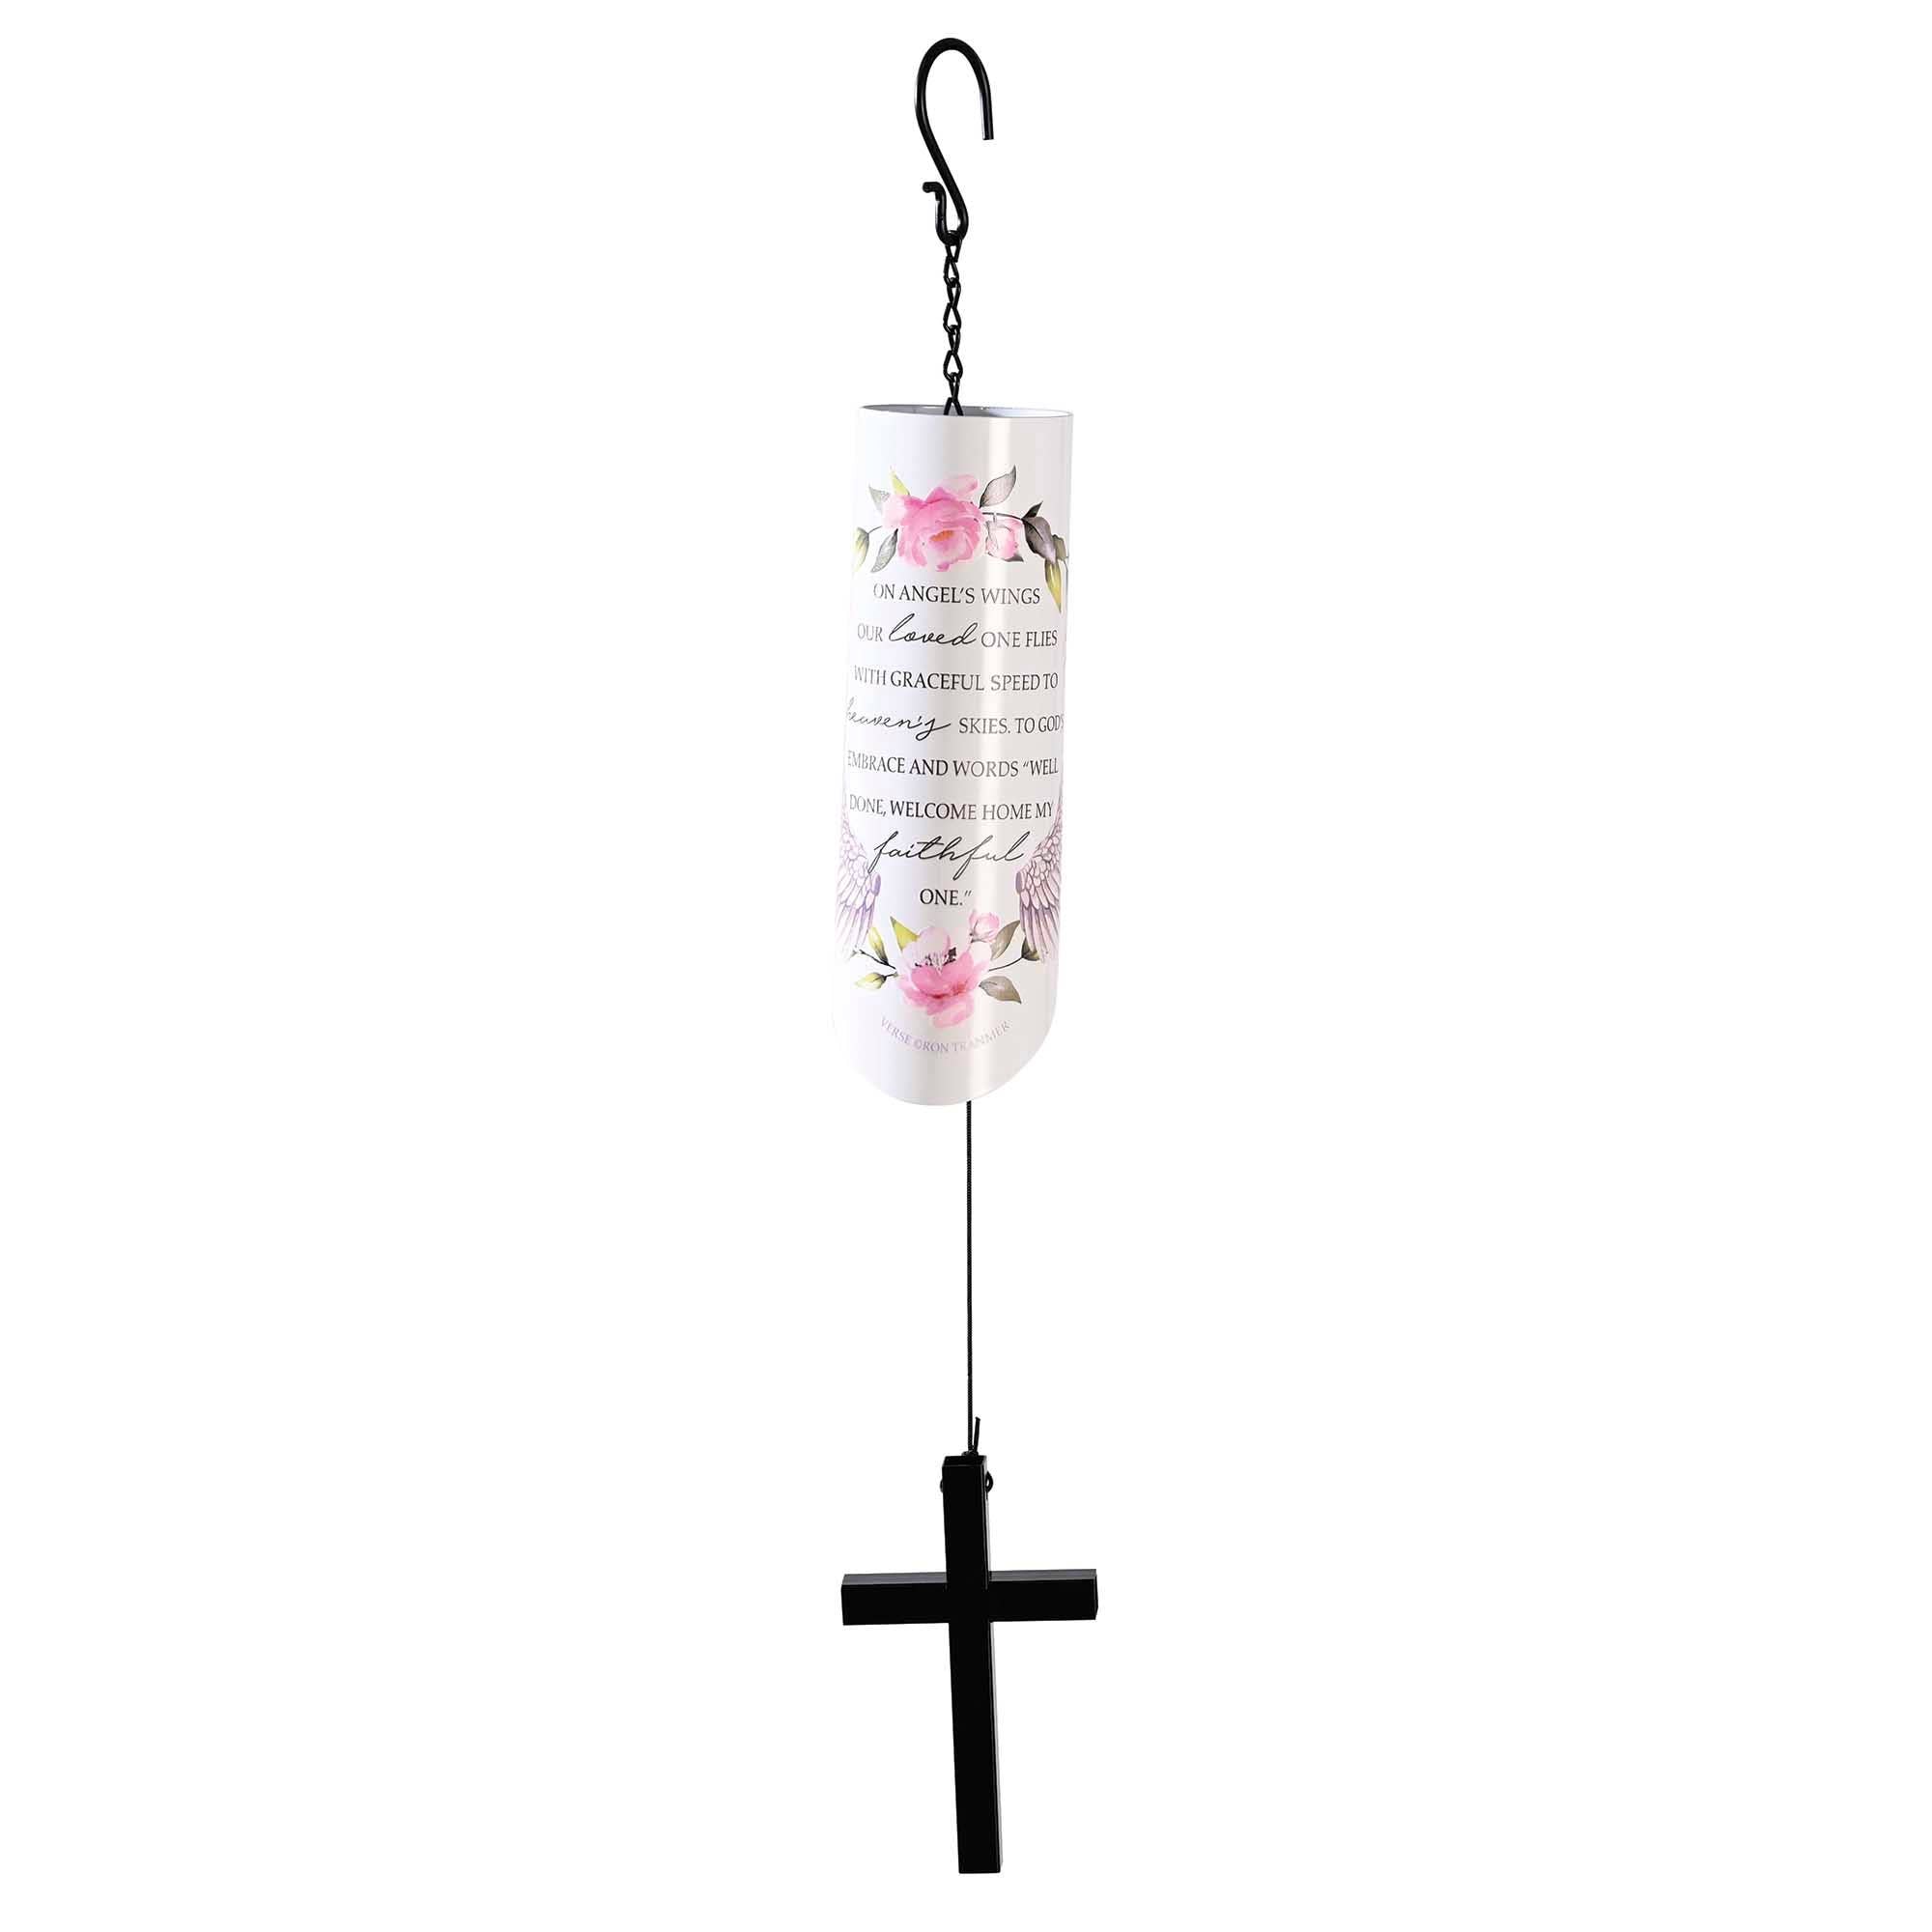 On Angels Wings 23" Wind Chime